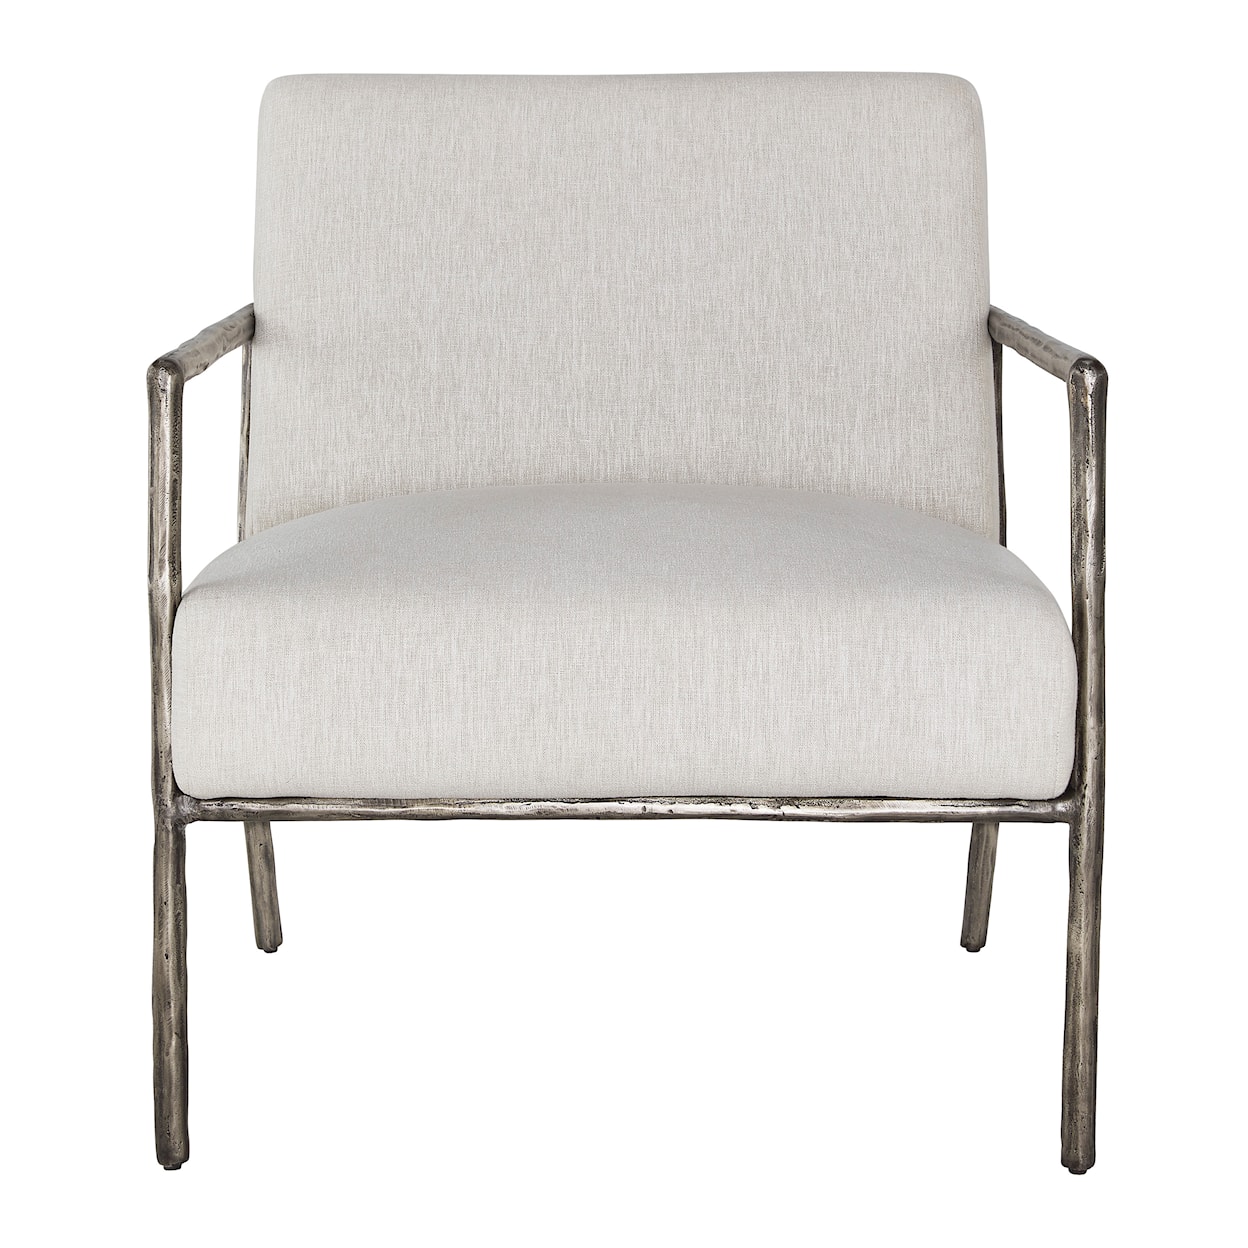 Signature Design by Ashley Riana Accent Chair